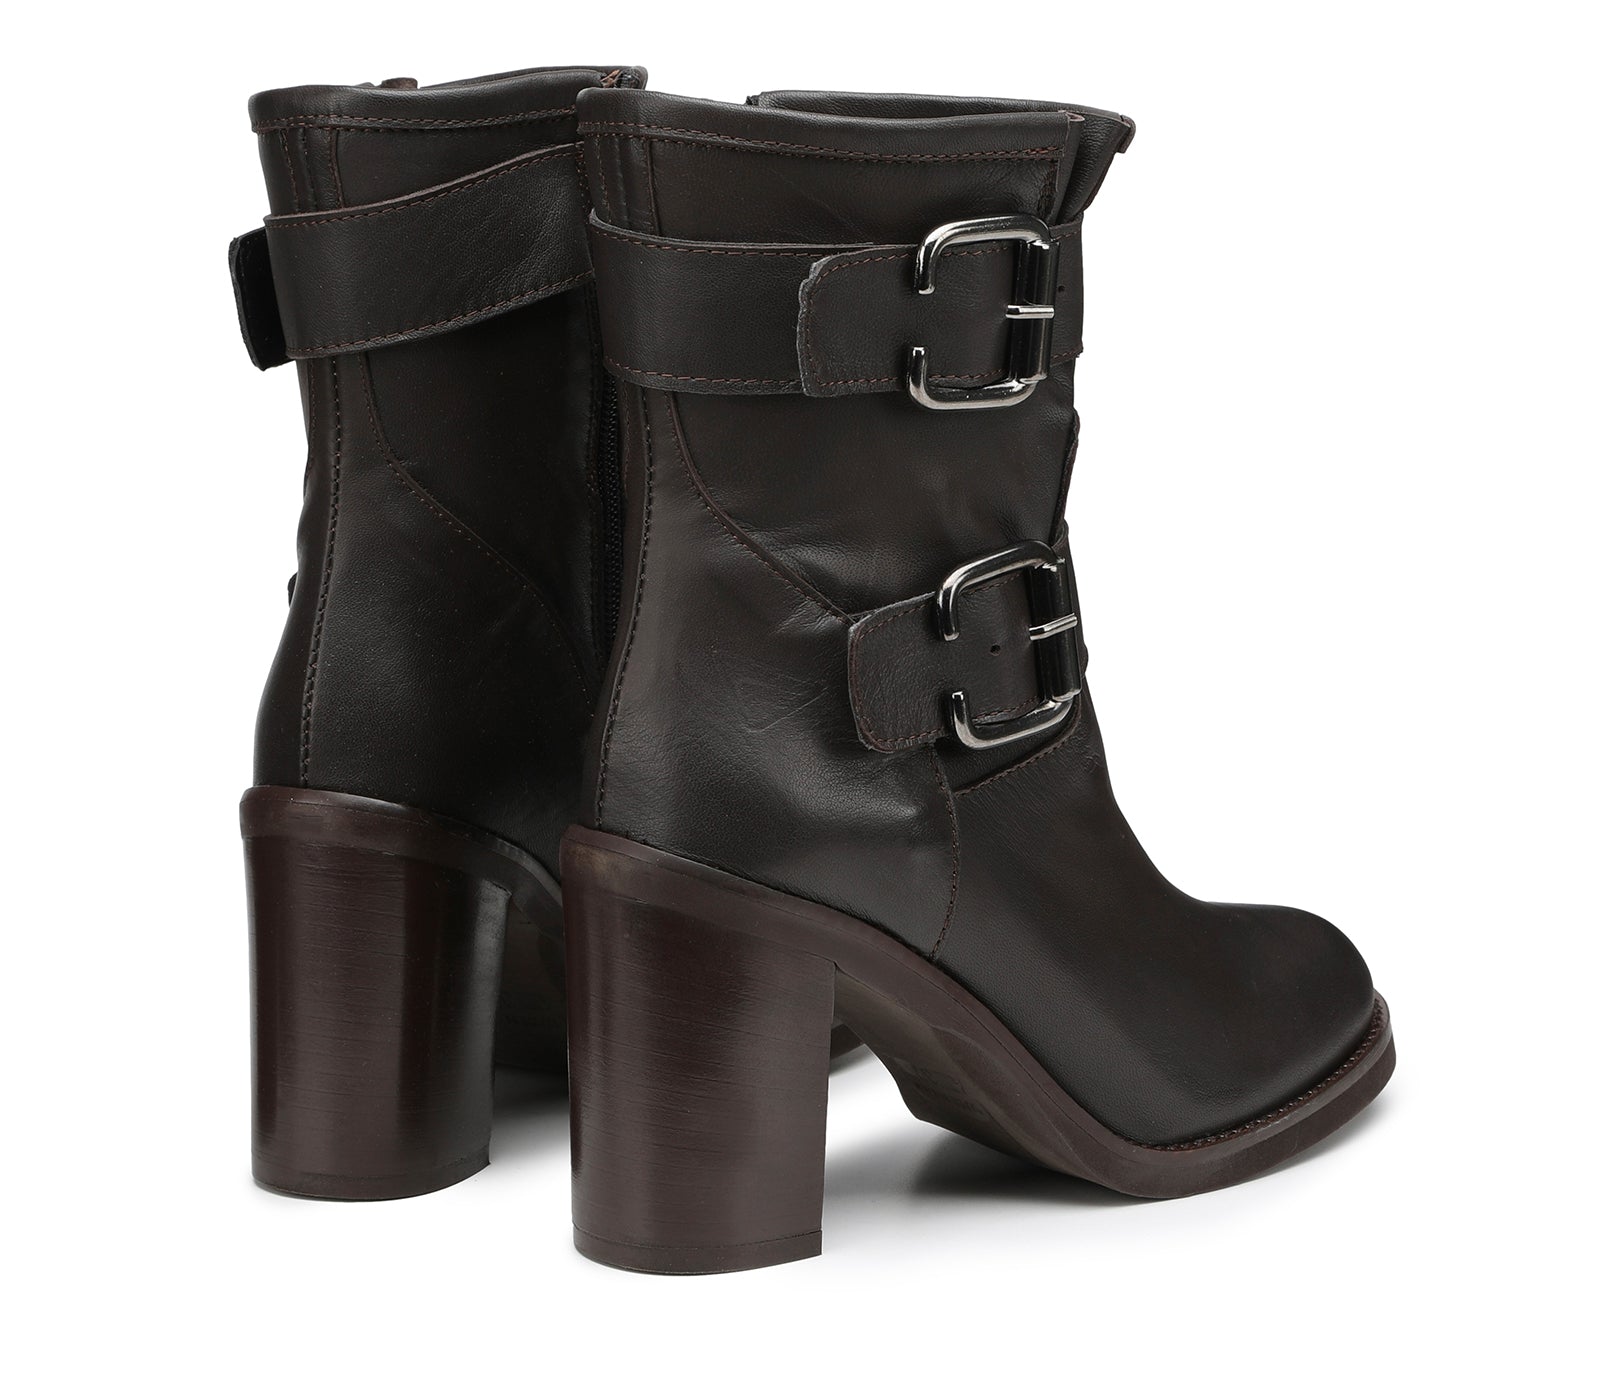 Black Women's Boots with Wide Heels and Adjustable Straps